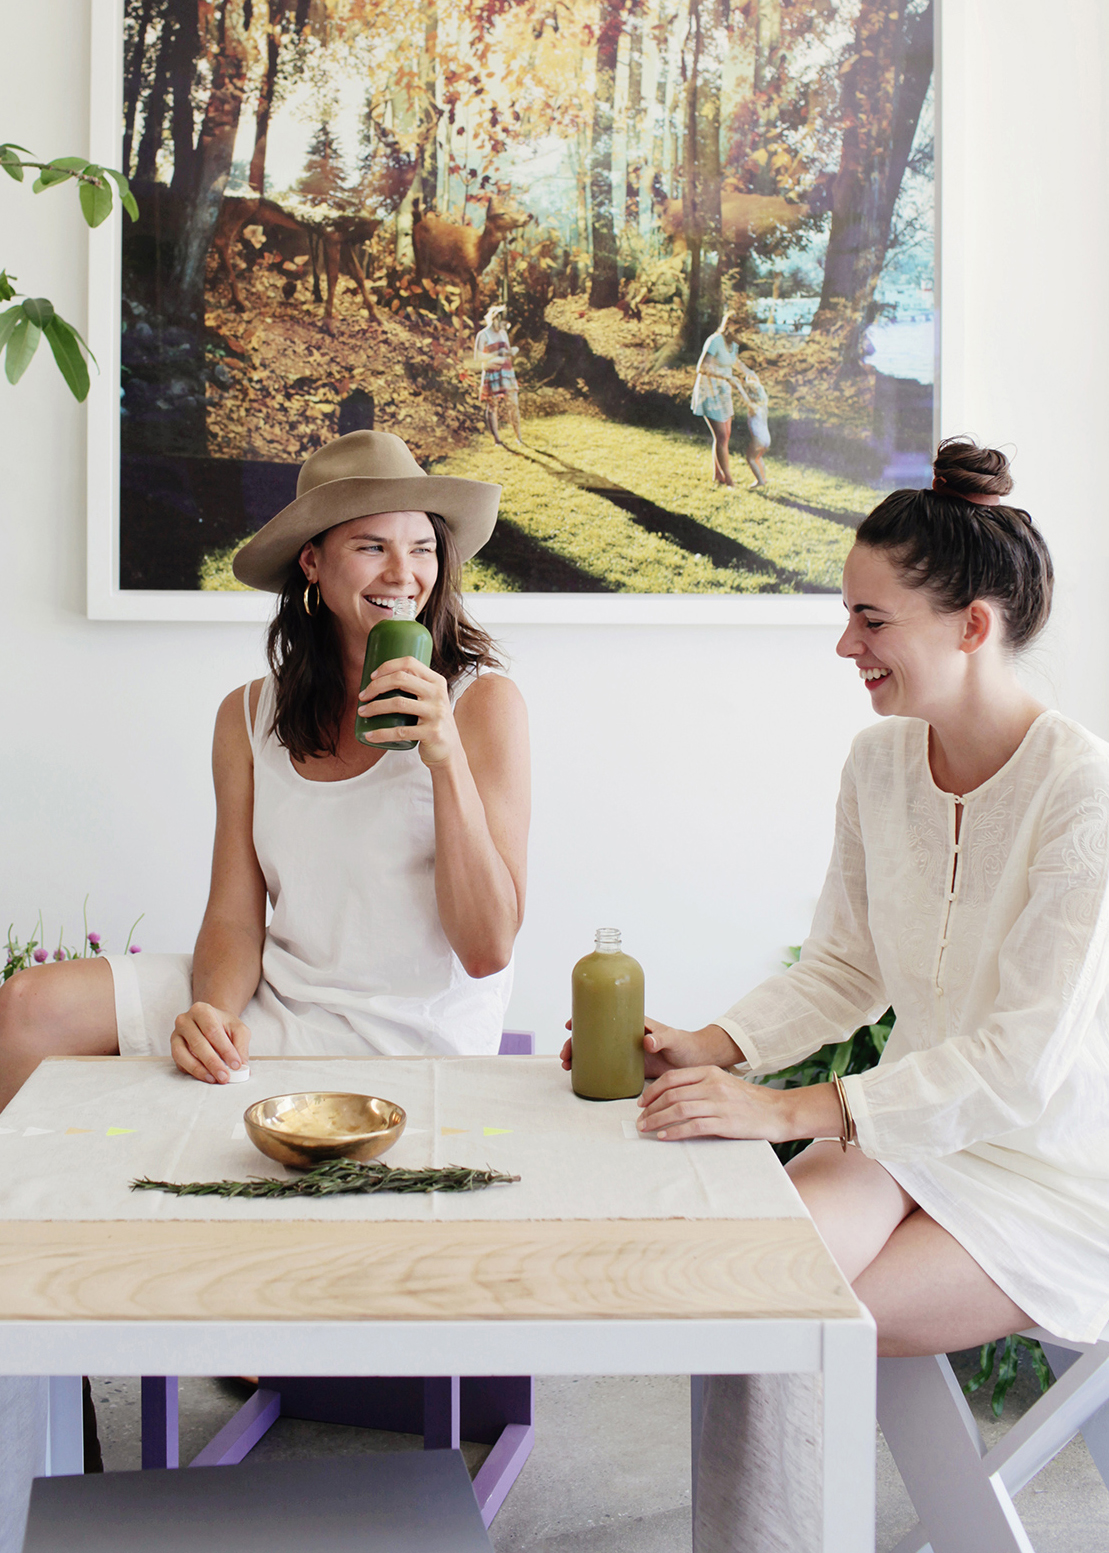 Joyful advertising moment by Kimberly Genevieve: Two women share laughter while enjoying healthy juices